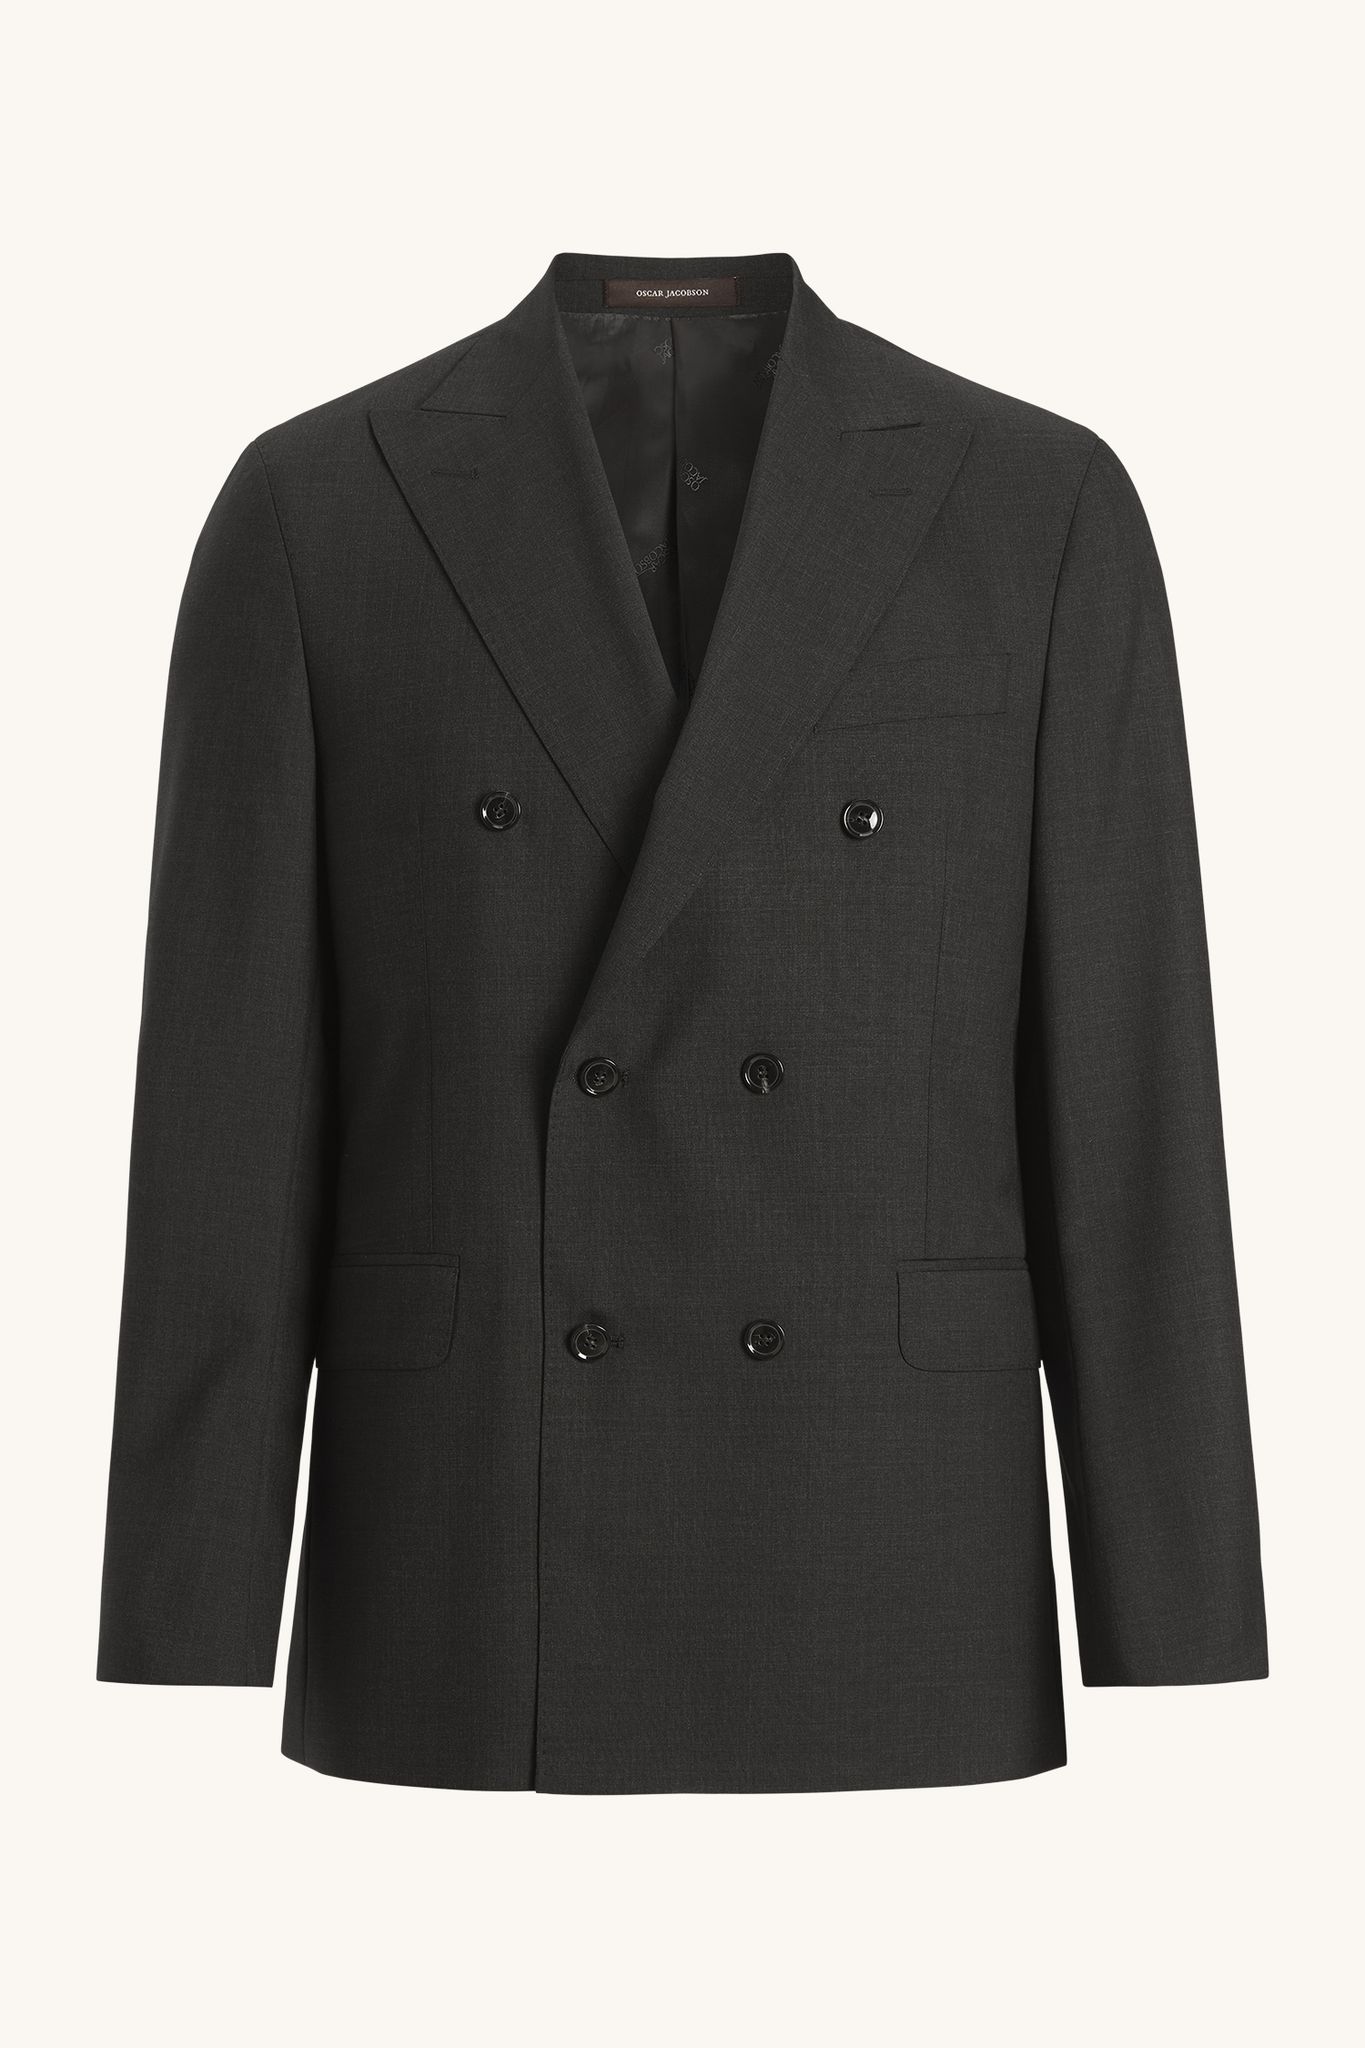 Louis Vuitton Classic Single-Breasted Coat BLACK. Size 50